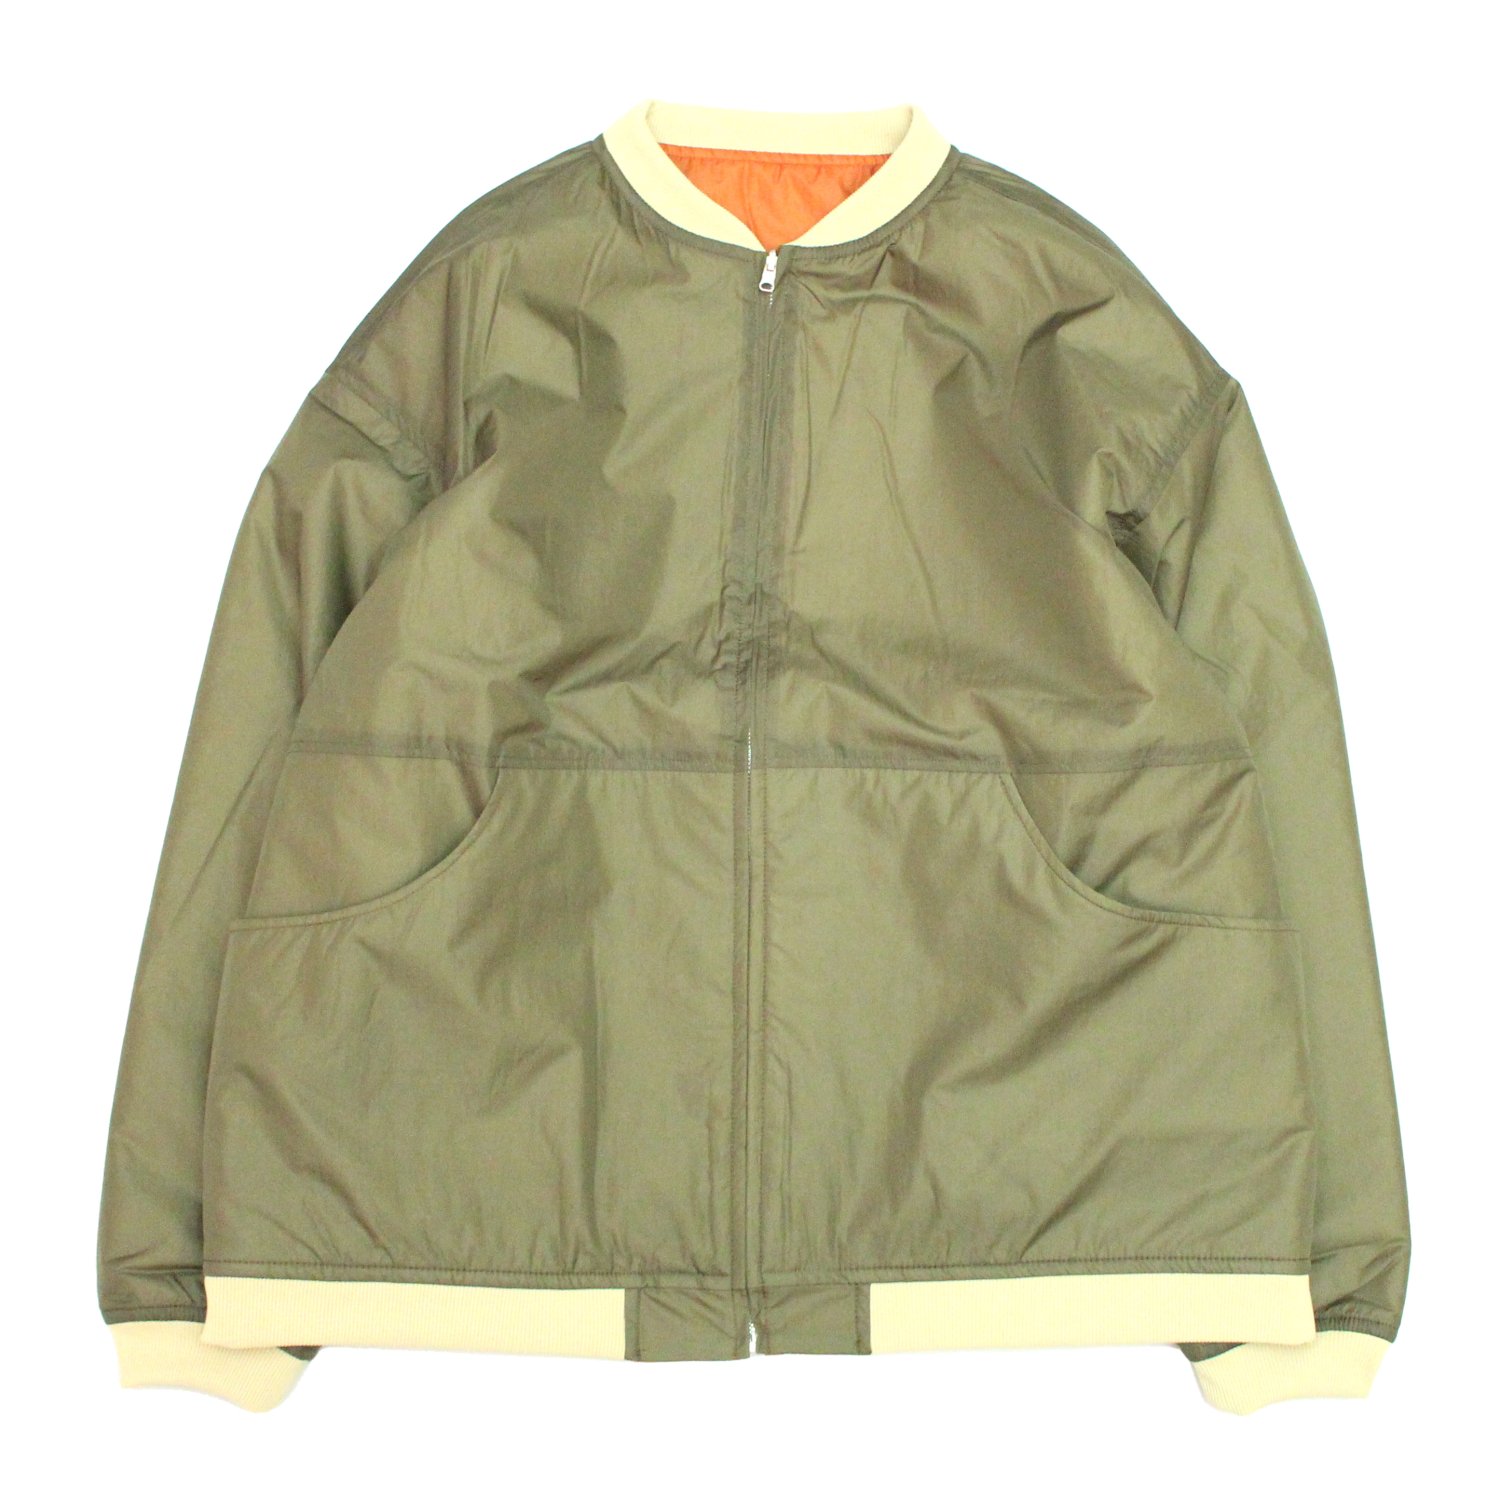 NOROLL APPLE BUTTER STORE JACKETナイキ